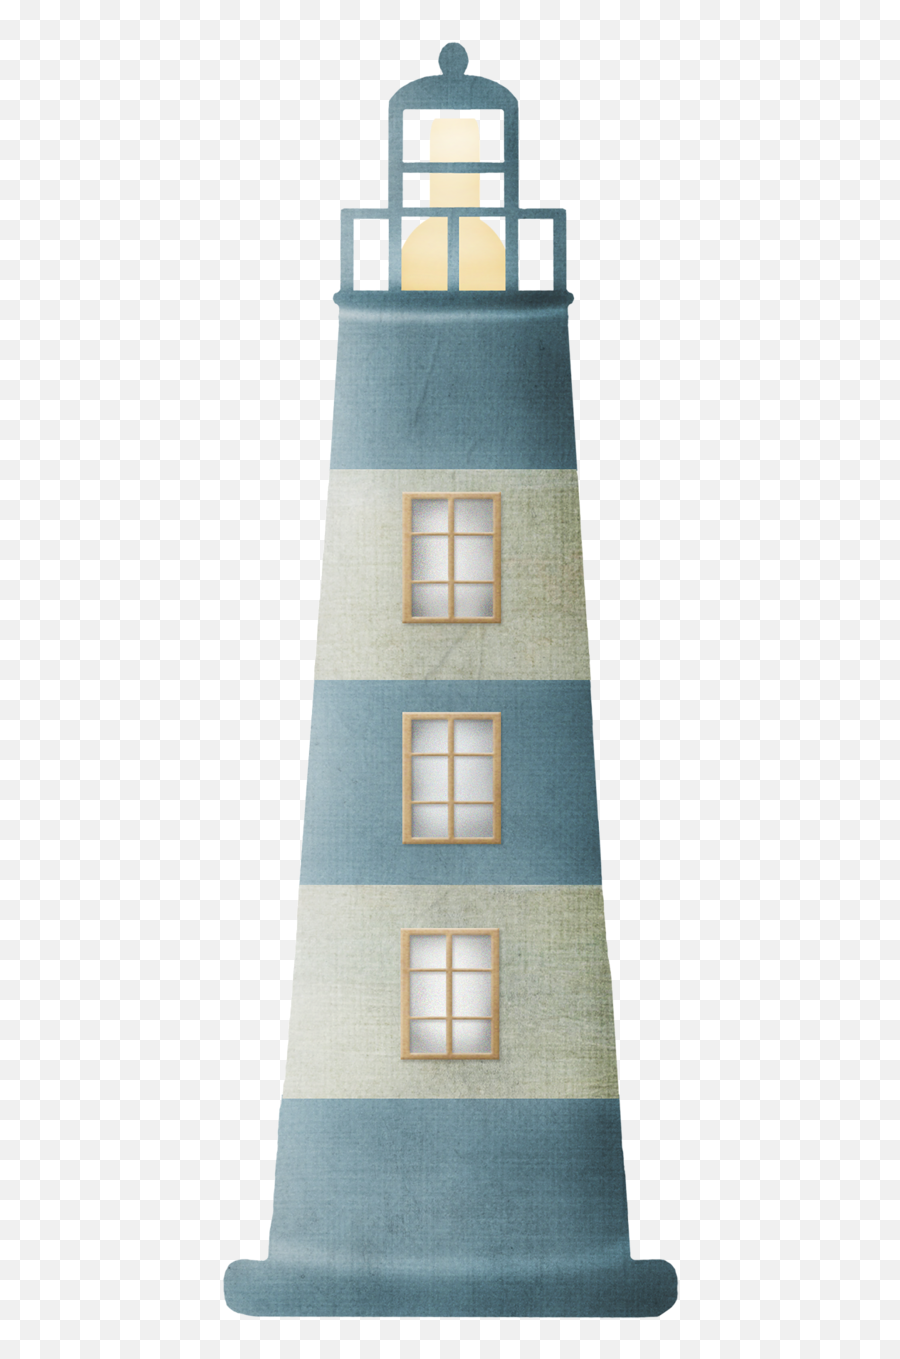 Wm - Splighthousepng Craft Images Lighthouse Clipart Portable Network Graphics,Lighthouse Clipart Png